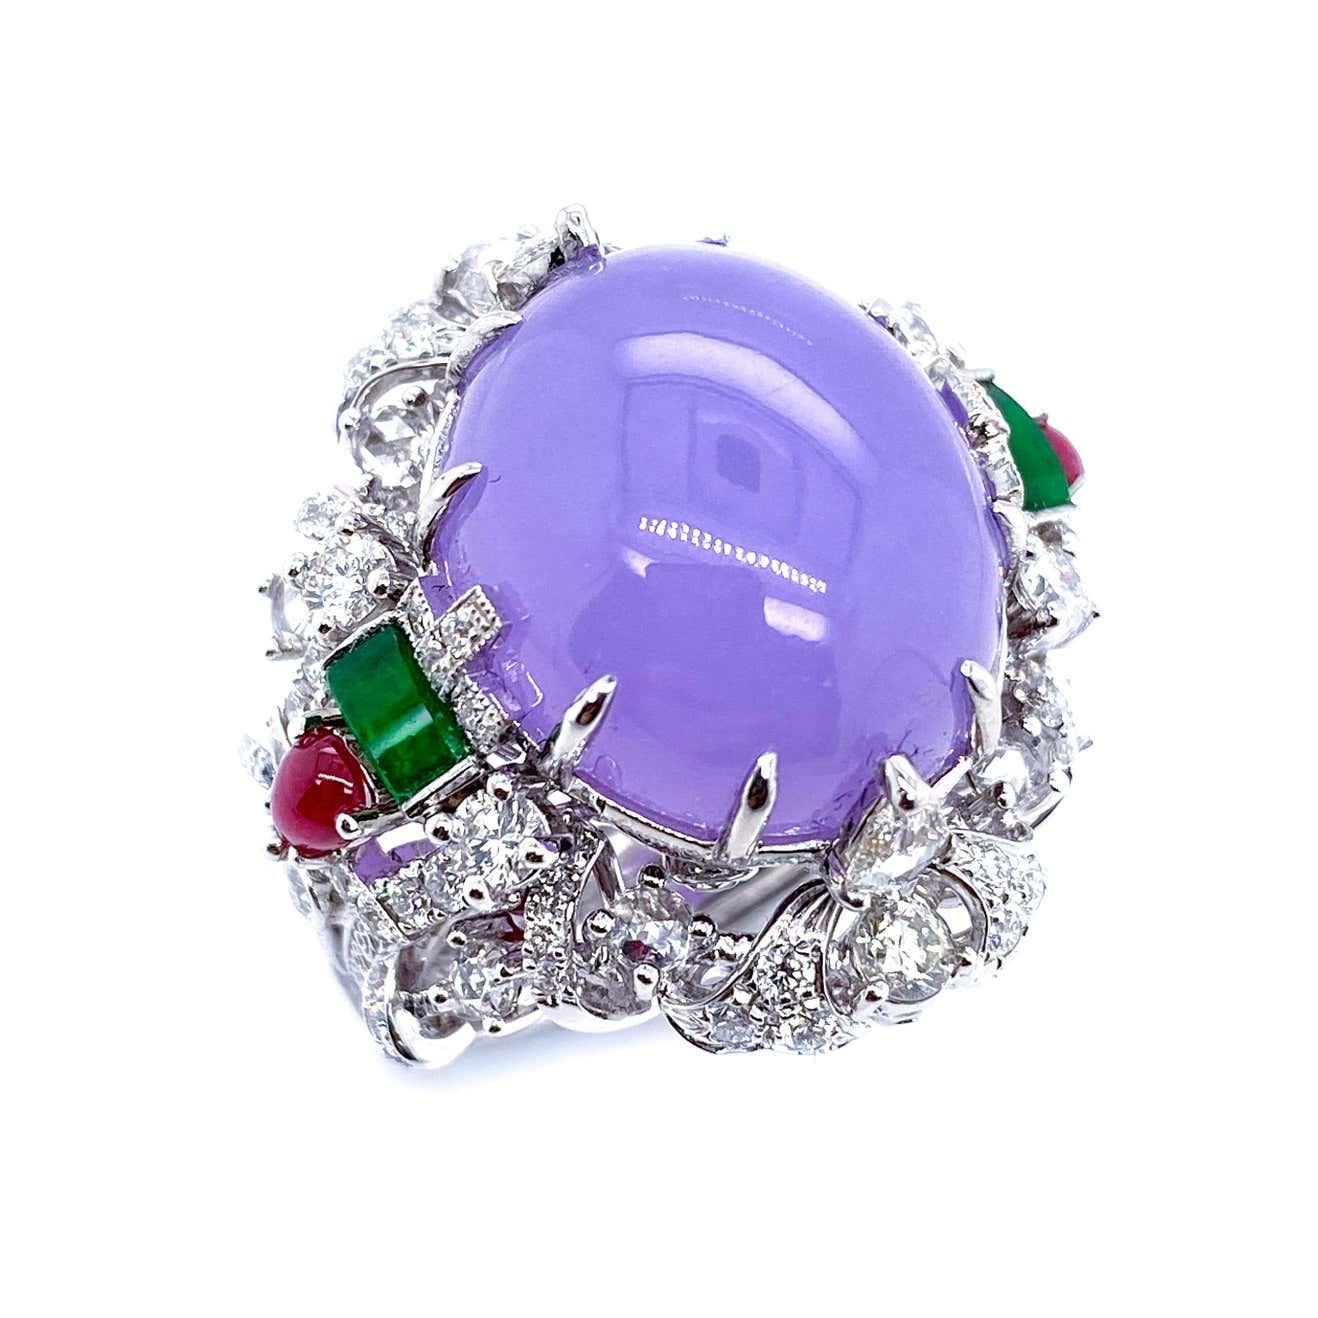 Cabochon Transformable 19.41 Carat Certified Lavender Jadeite Collectible Ring